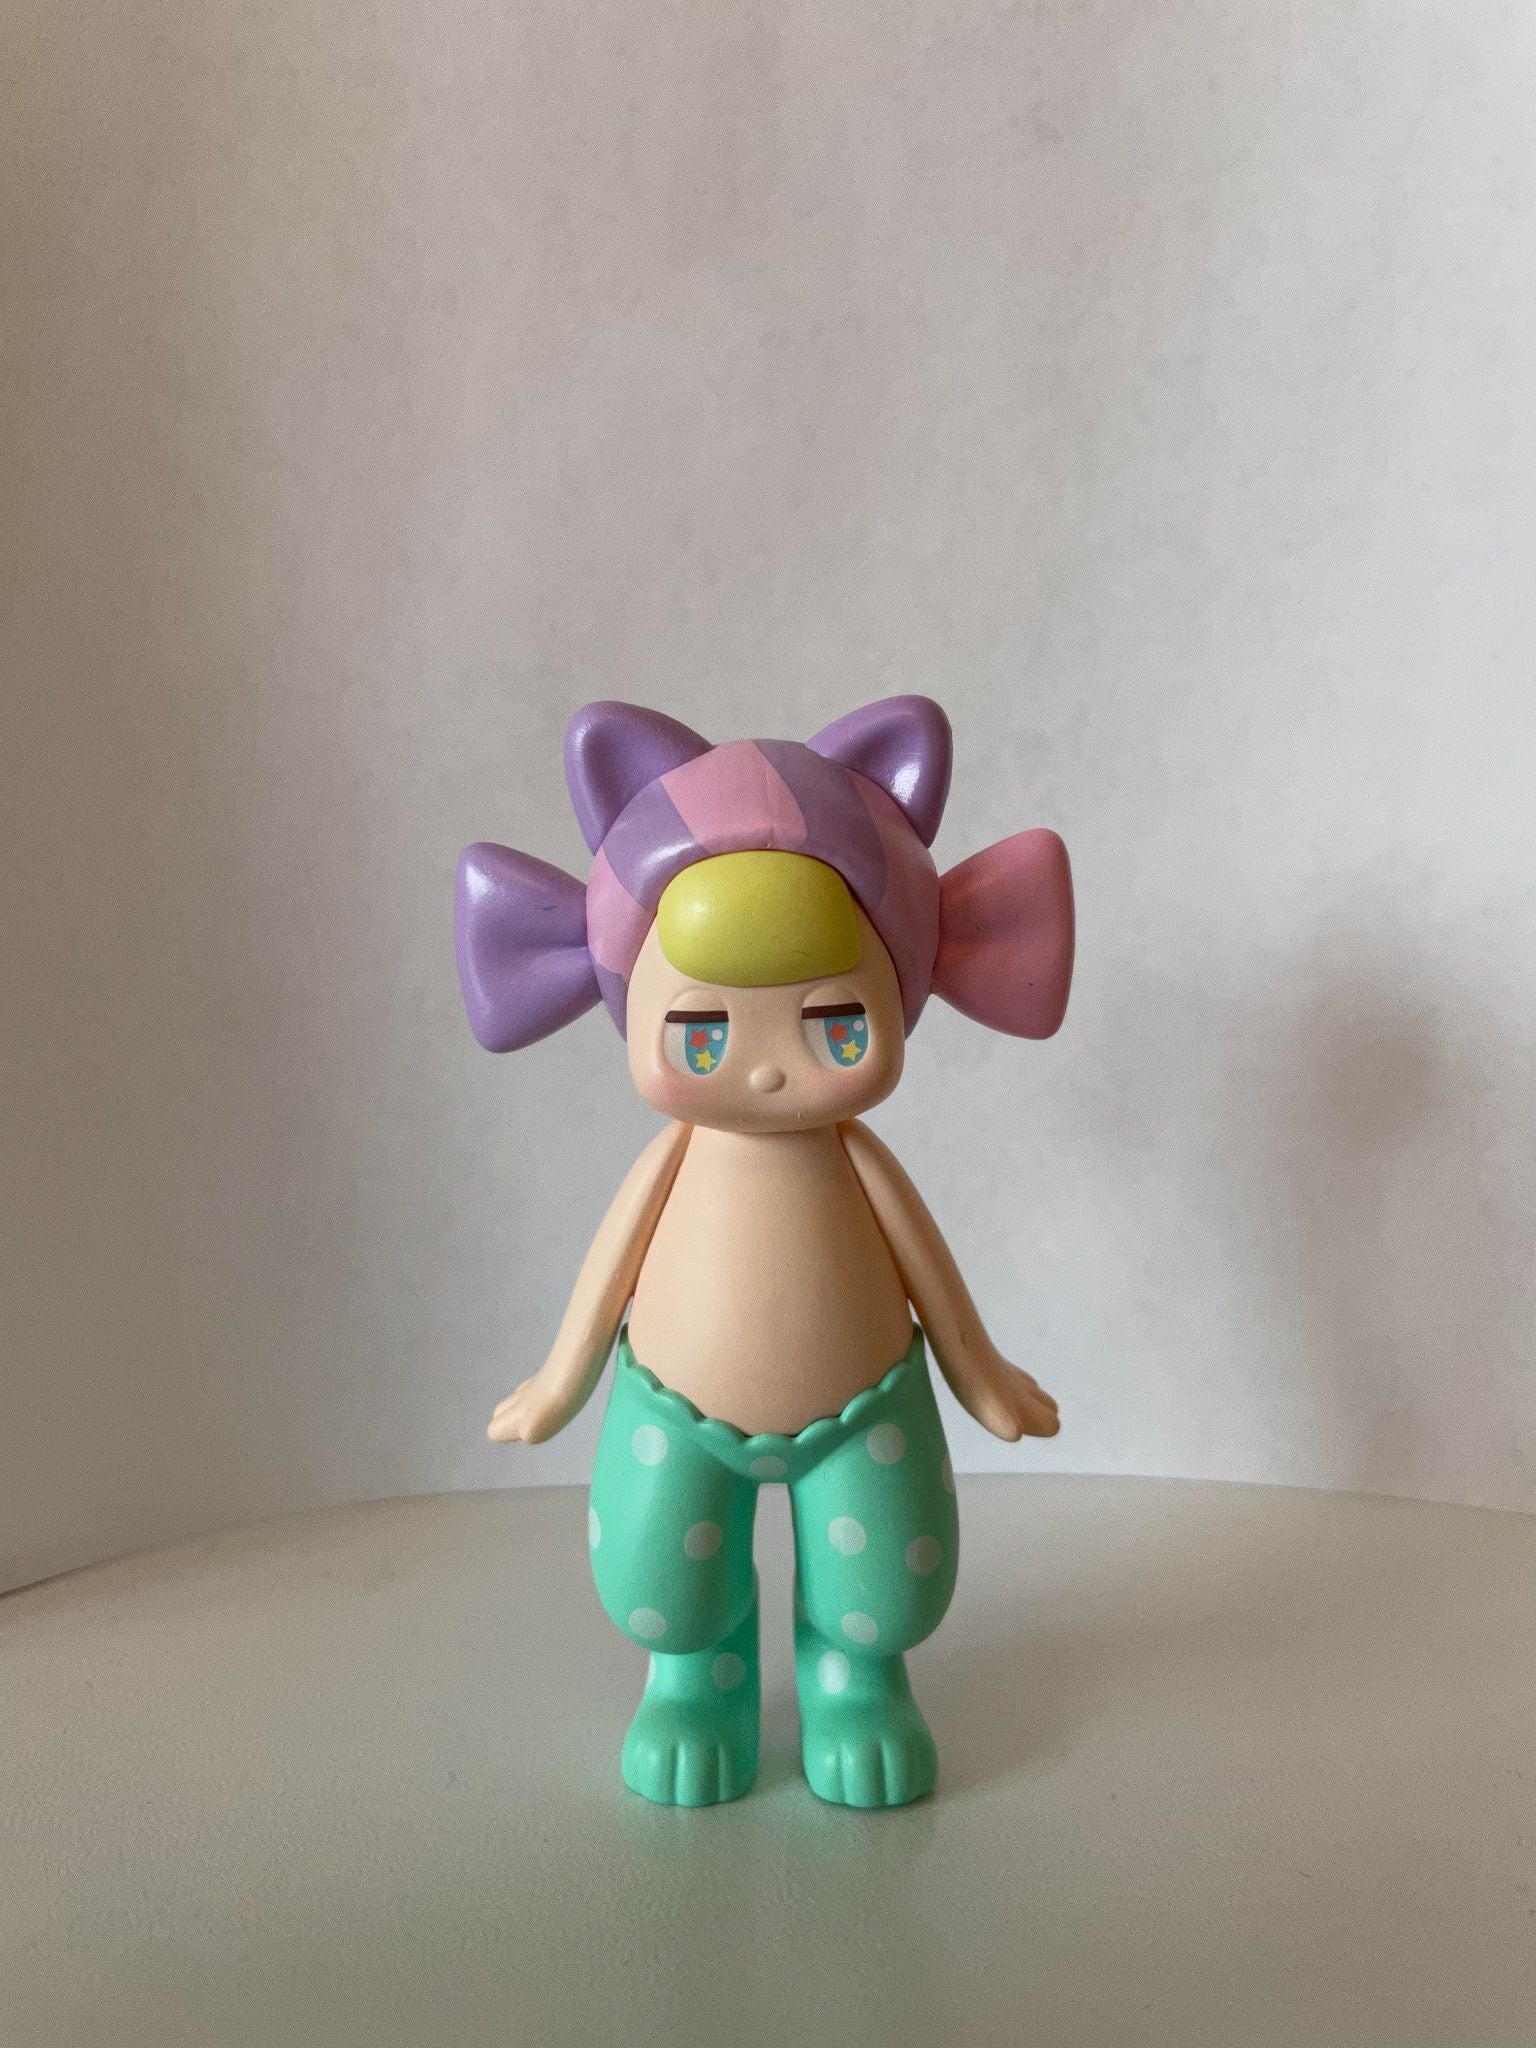 Candy - Satyr Rory Sweet as Sweets Blind Box Toy Series by Seulgie Lee x POPMART  - 1